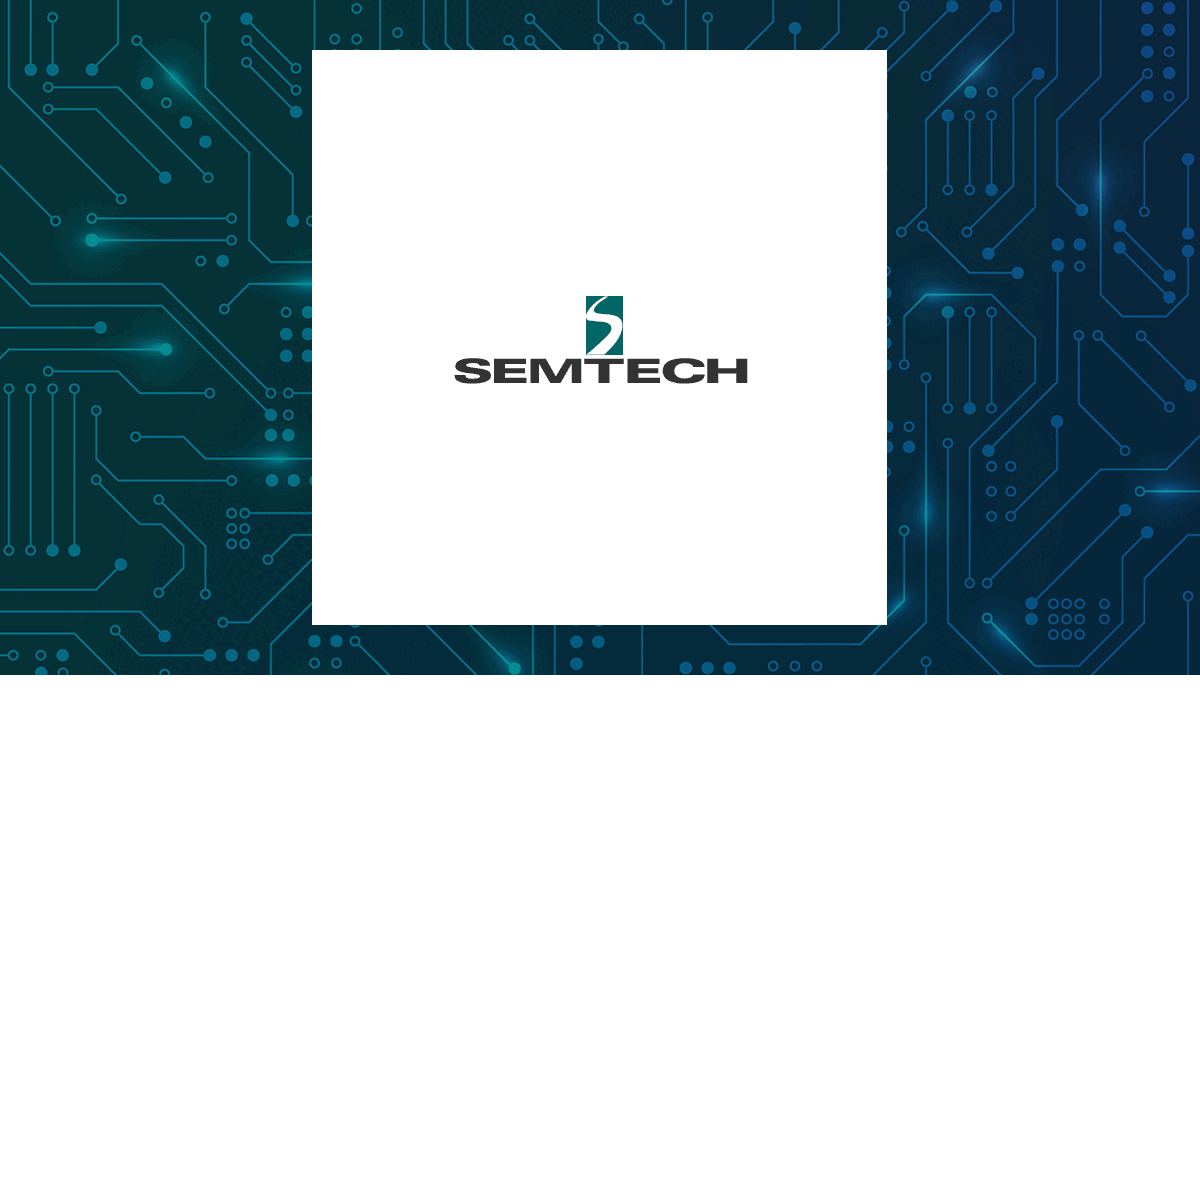 Semtech logo with Computer and Technology background